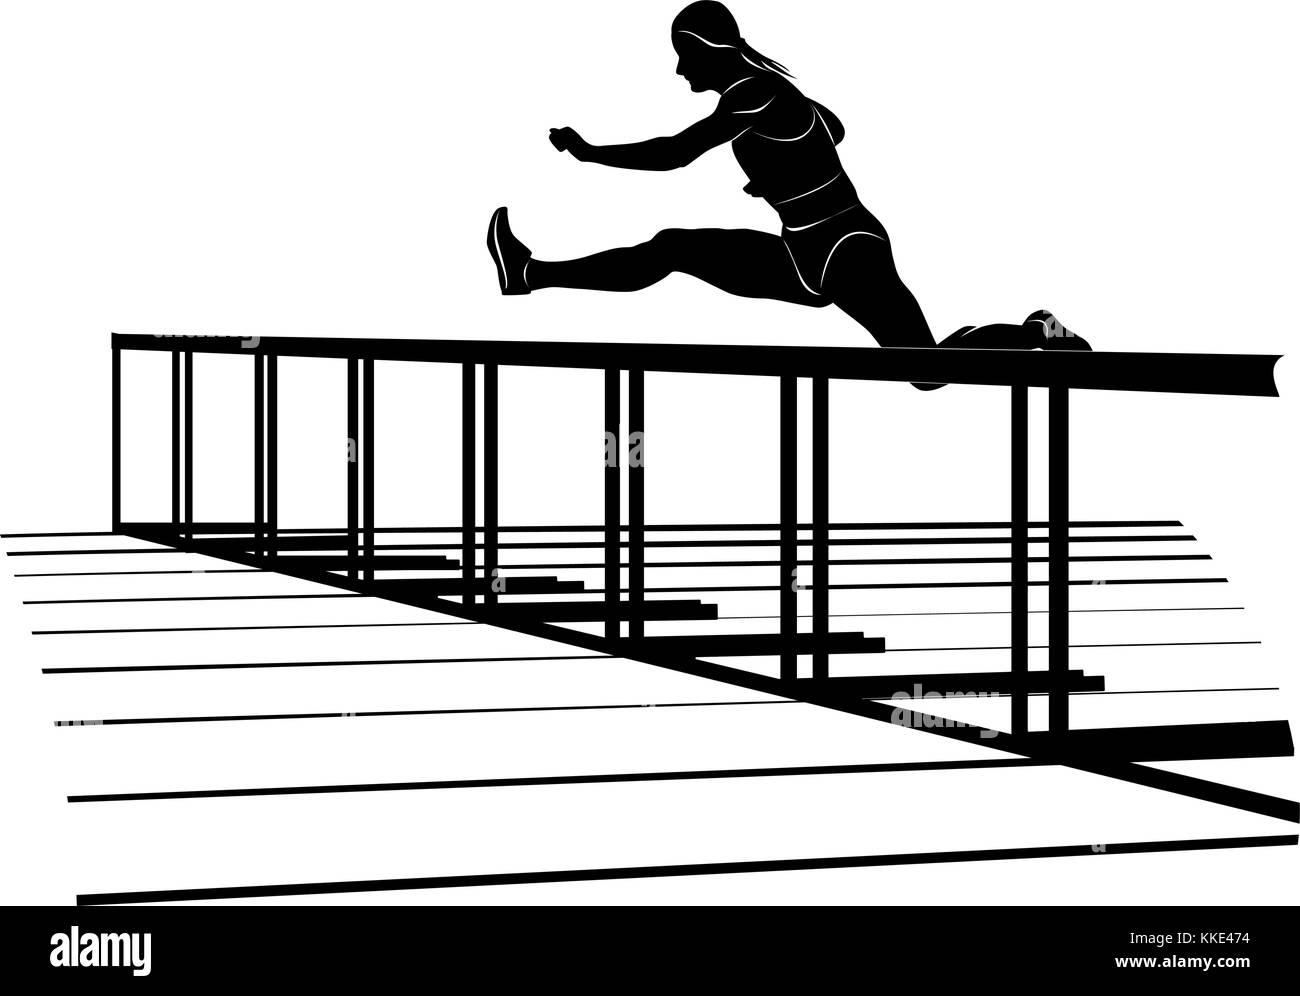 Vector silhouette of running sportswoman jumping over hurdle. Female athlete on hurdle sprint race Stock Vector